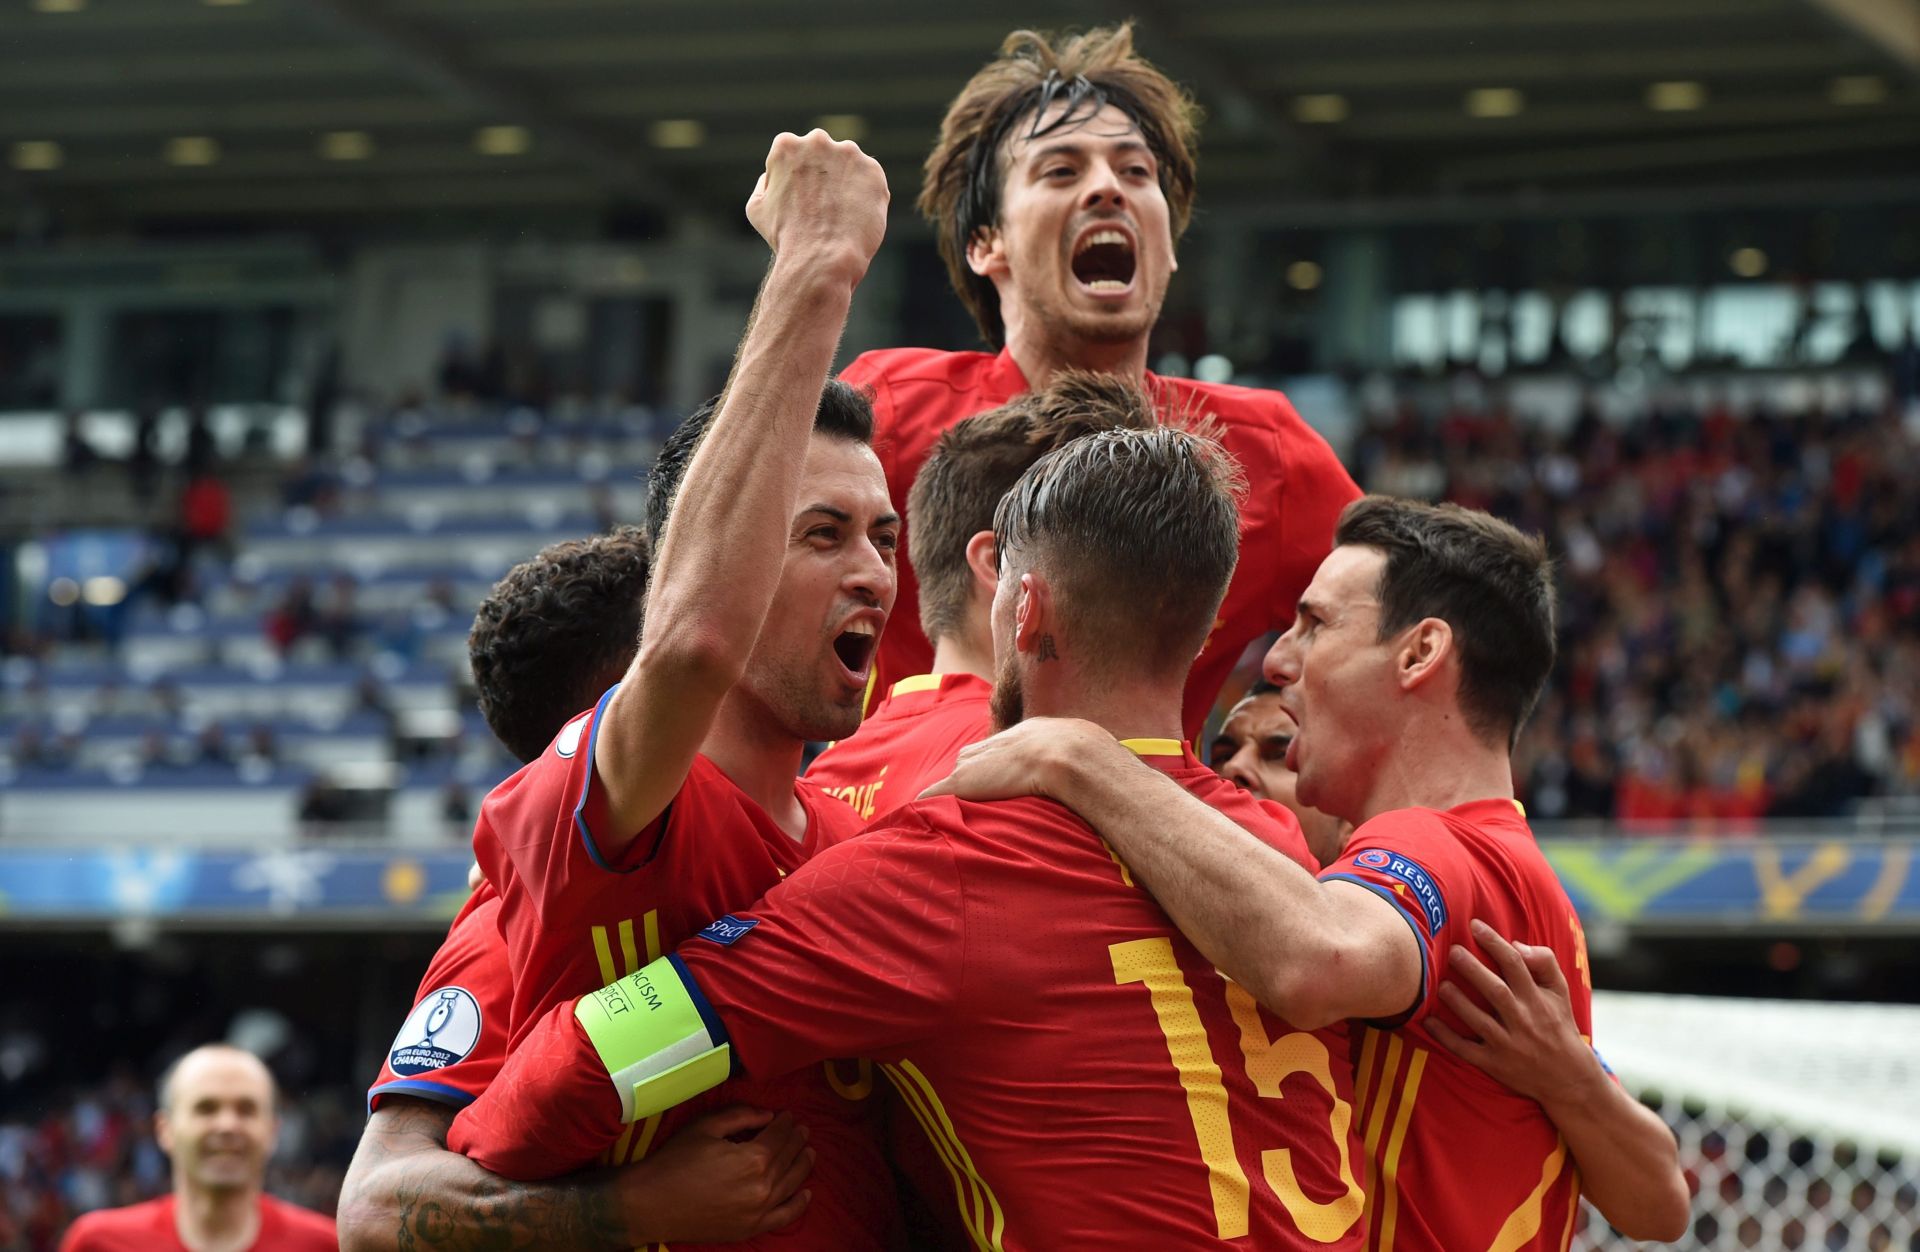 epa05361758 Spain players celebrate after scoring the 1-0 goal during the UEFA EURO 2016 group D preliminary round match between Spain and Czech Republic at Stade Municipal de Toulouse in Toulouse, France, 13 June 2016.

(RESTRICTIONS APPLY: For editorial news reporting purposes only. Not used for commercial or marketing purposes without prior written approval of UEFA. Images must appear as still images and must not emulate match action video footage. Photographs published in online publications (whether via the Internet or otherwise) shall have an interval of at least 20 seconds between the posting.)  EPA/VASSIL DONEV   EDITORIAL USE ONLY